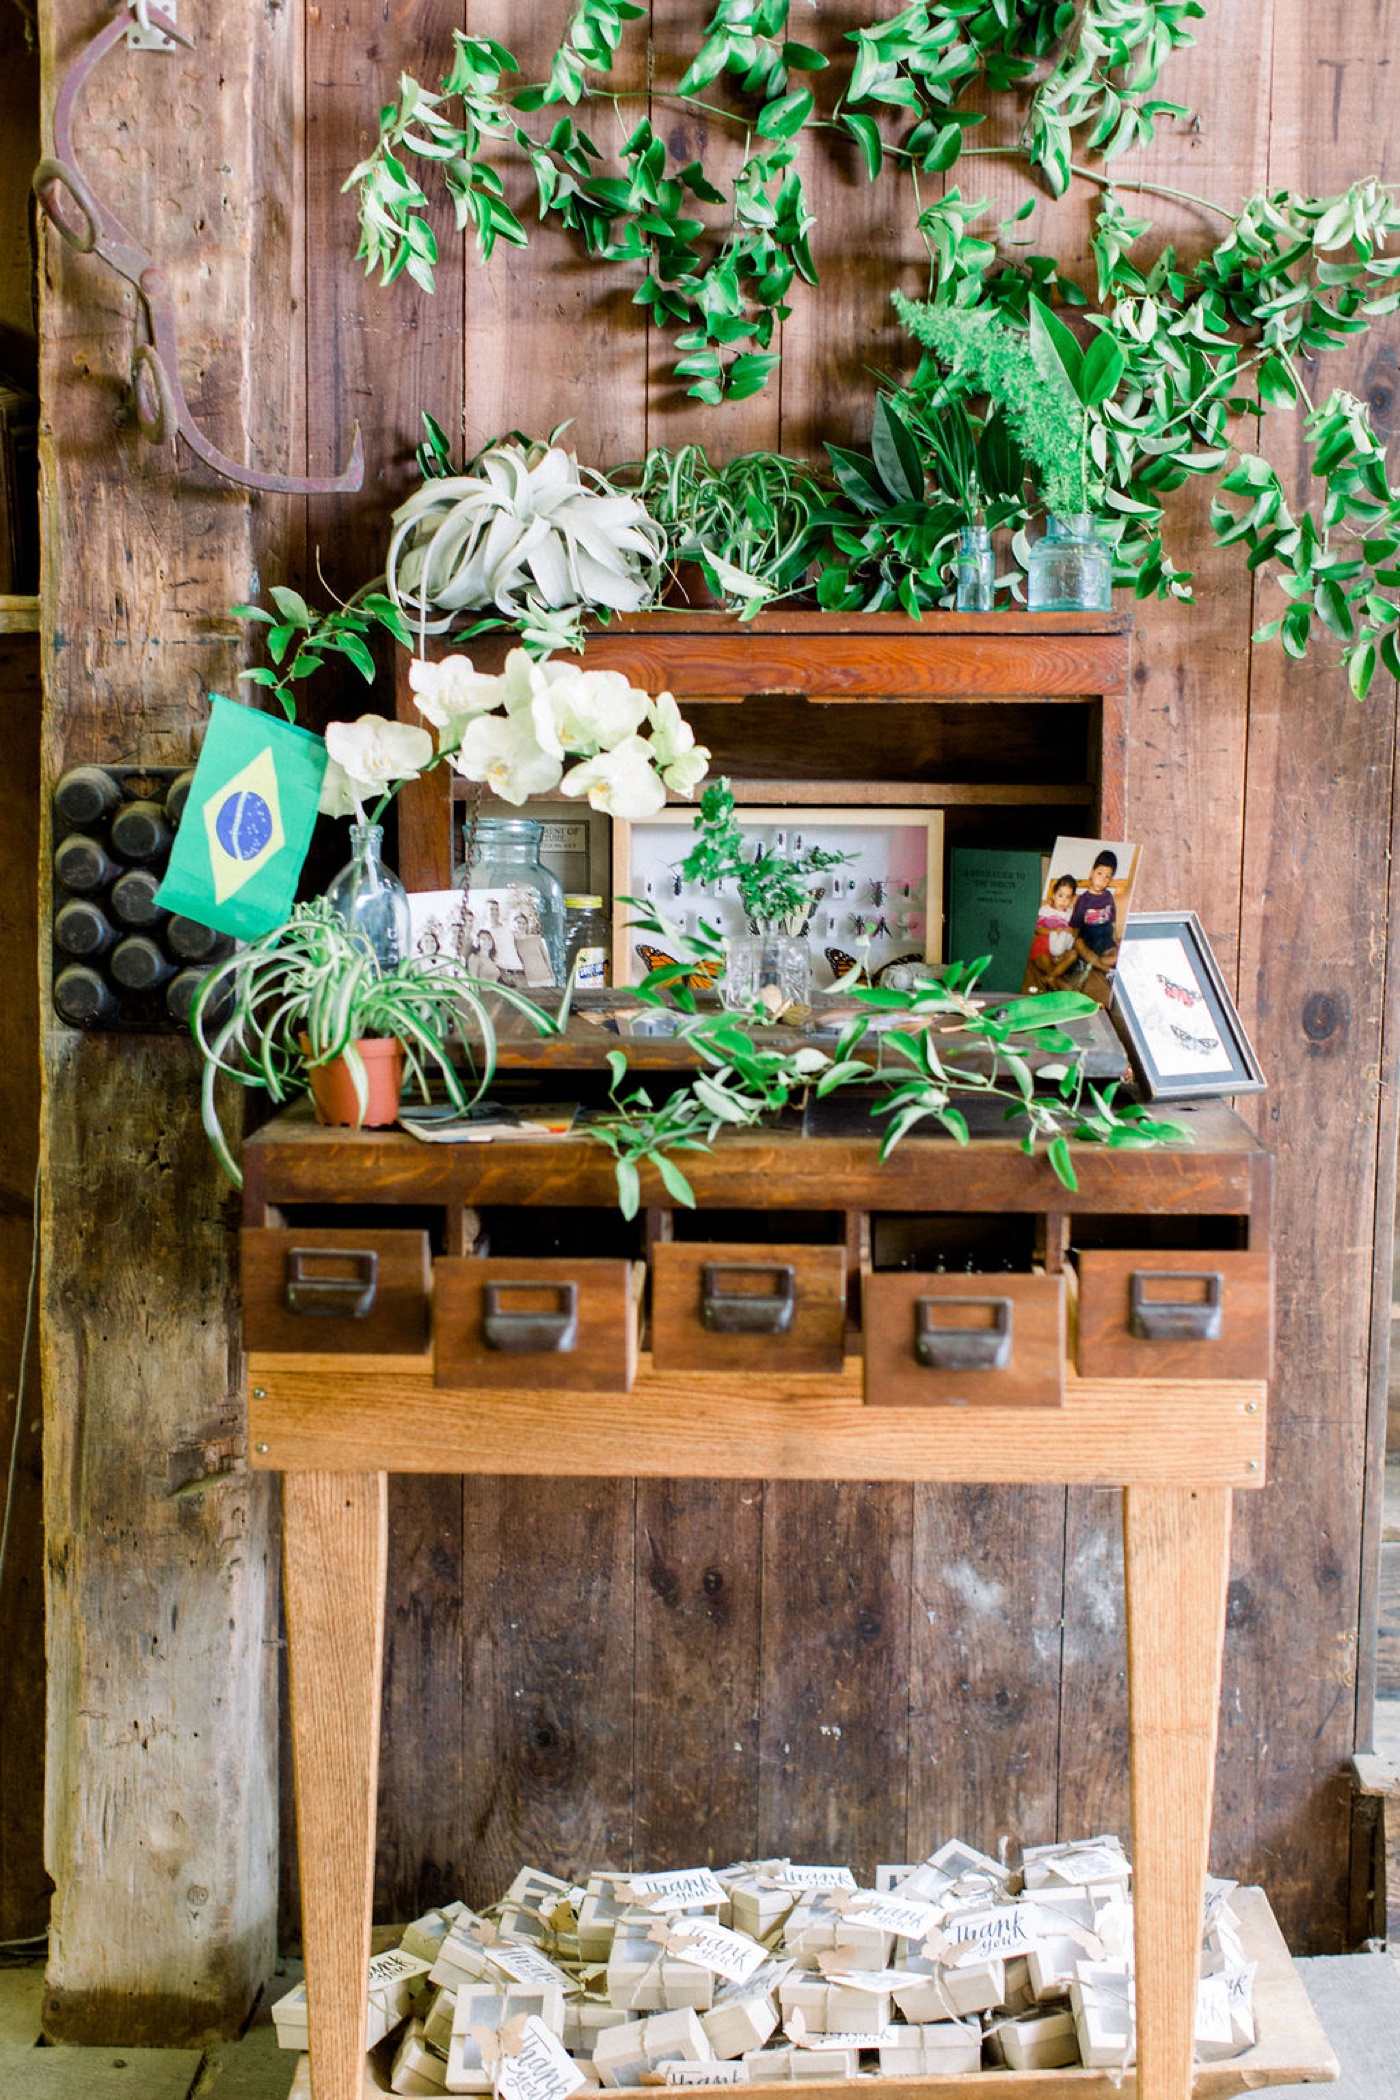 Antique desk with family photos and butterfly specimens at an insect-themed wedding